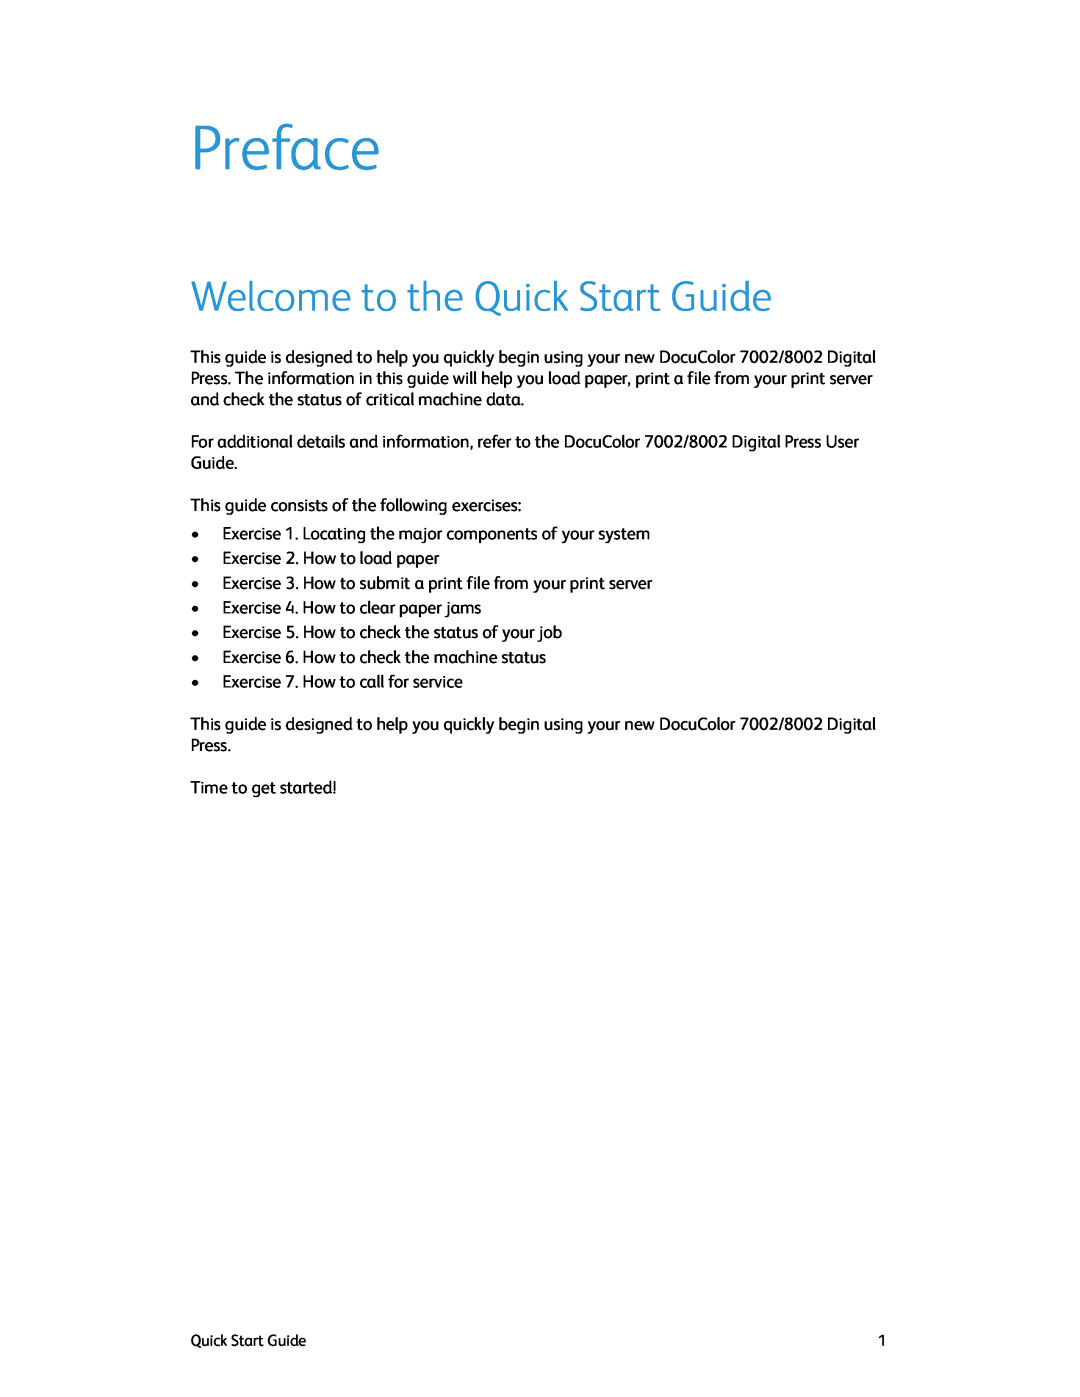 Xerox 8002, 7002 manual Preface, Welcome to the Quick Start Guide 